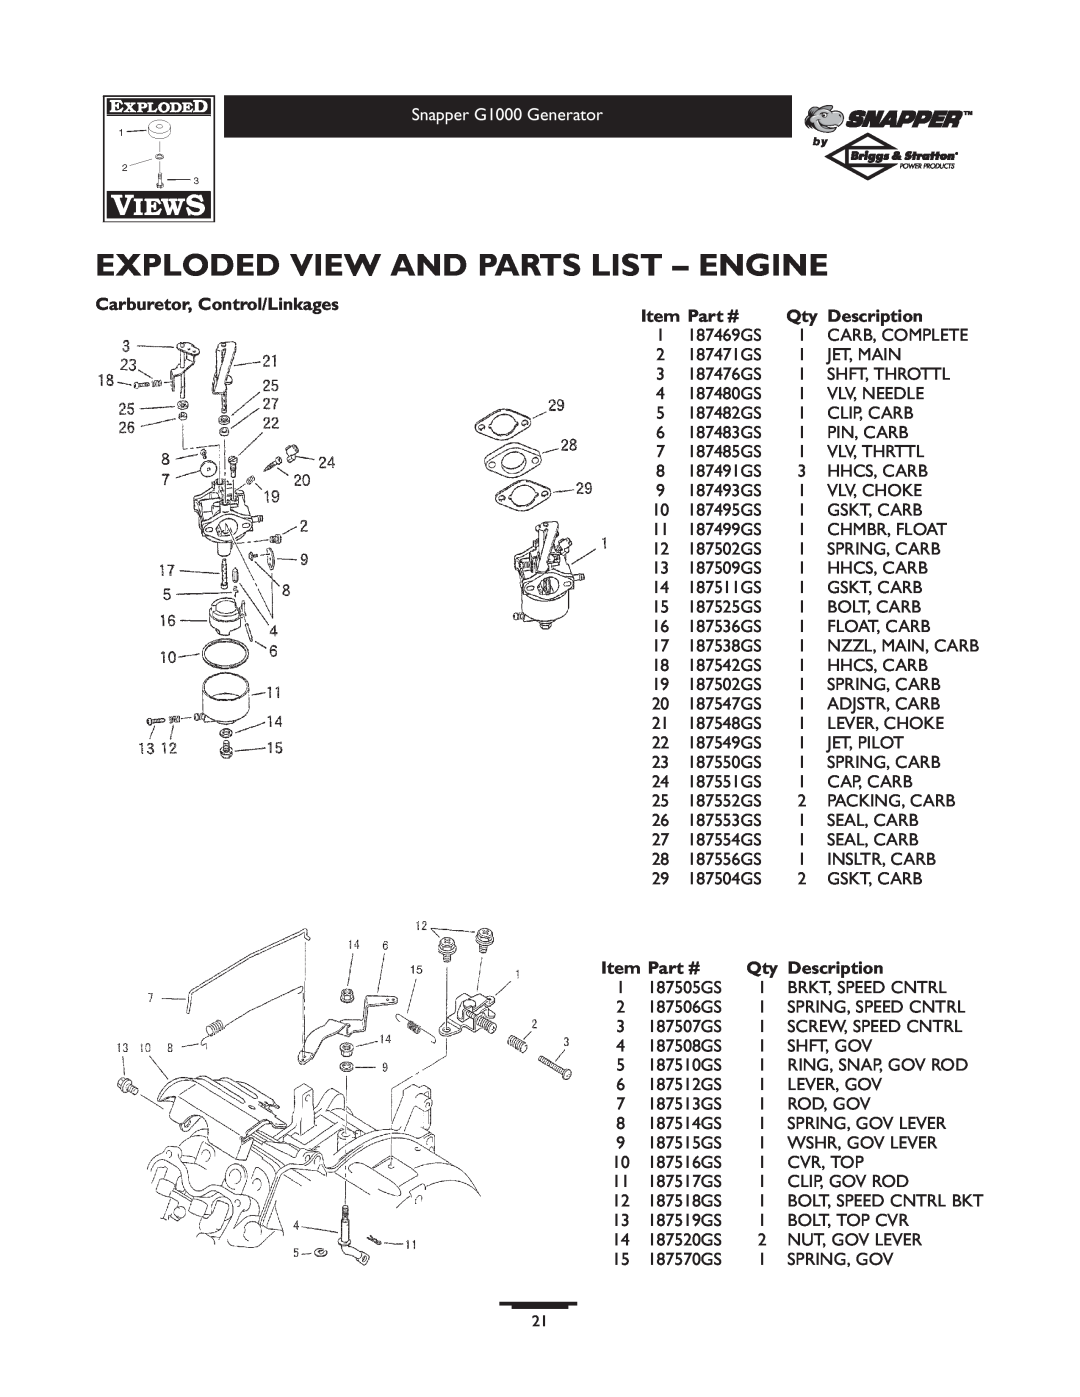 Snapper 1666-0 owner manual Exploded View And Parts List - Engine, Bolt, Speed Cntrl Bkt 